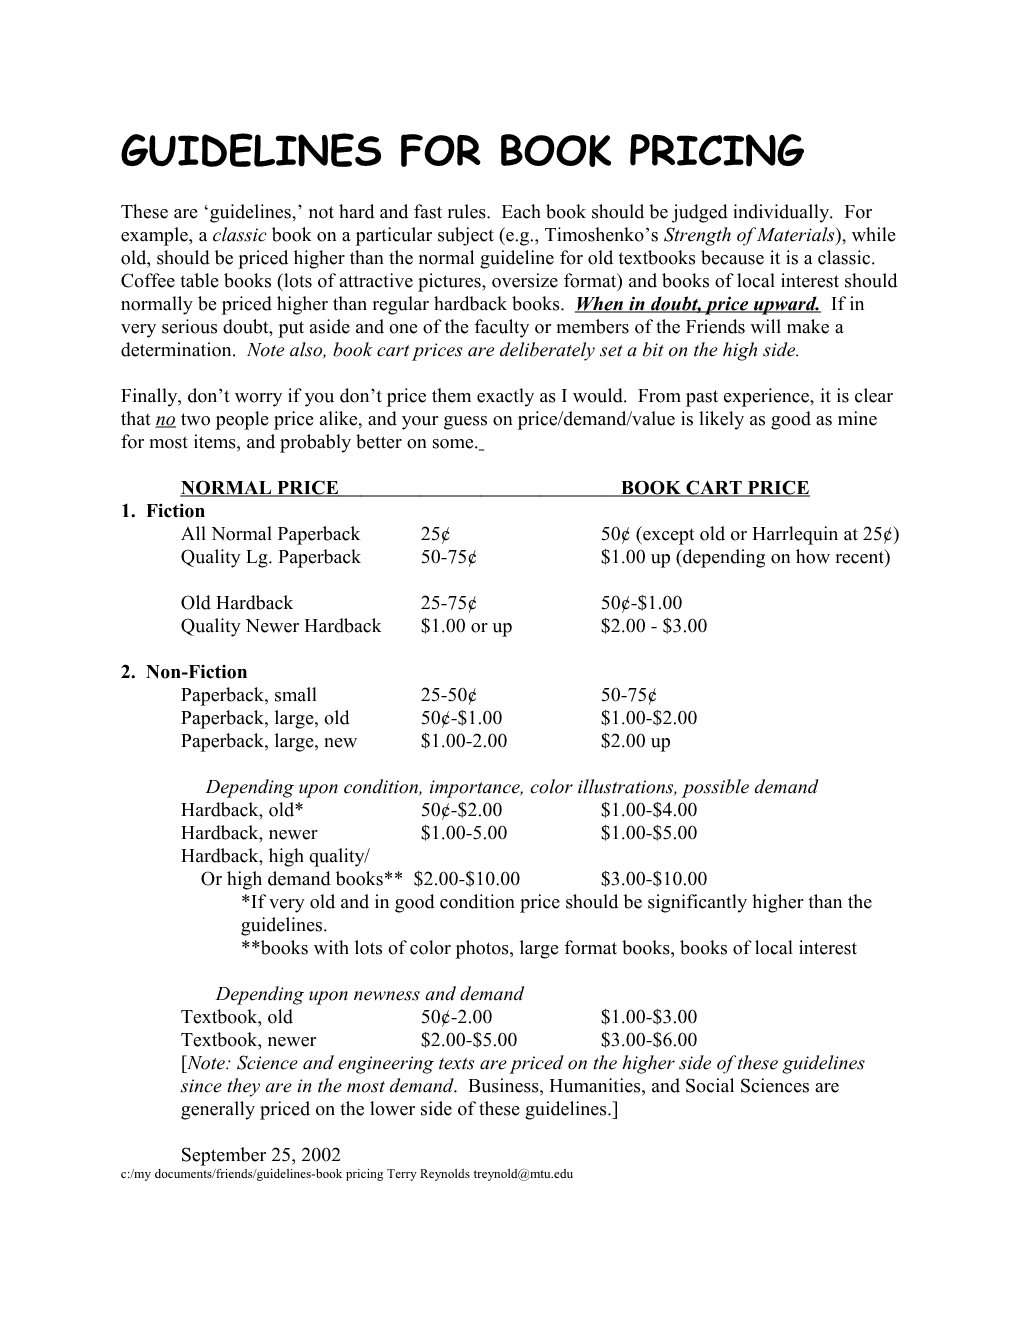 Guidelines for Book Pricing